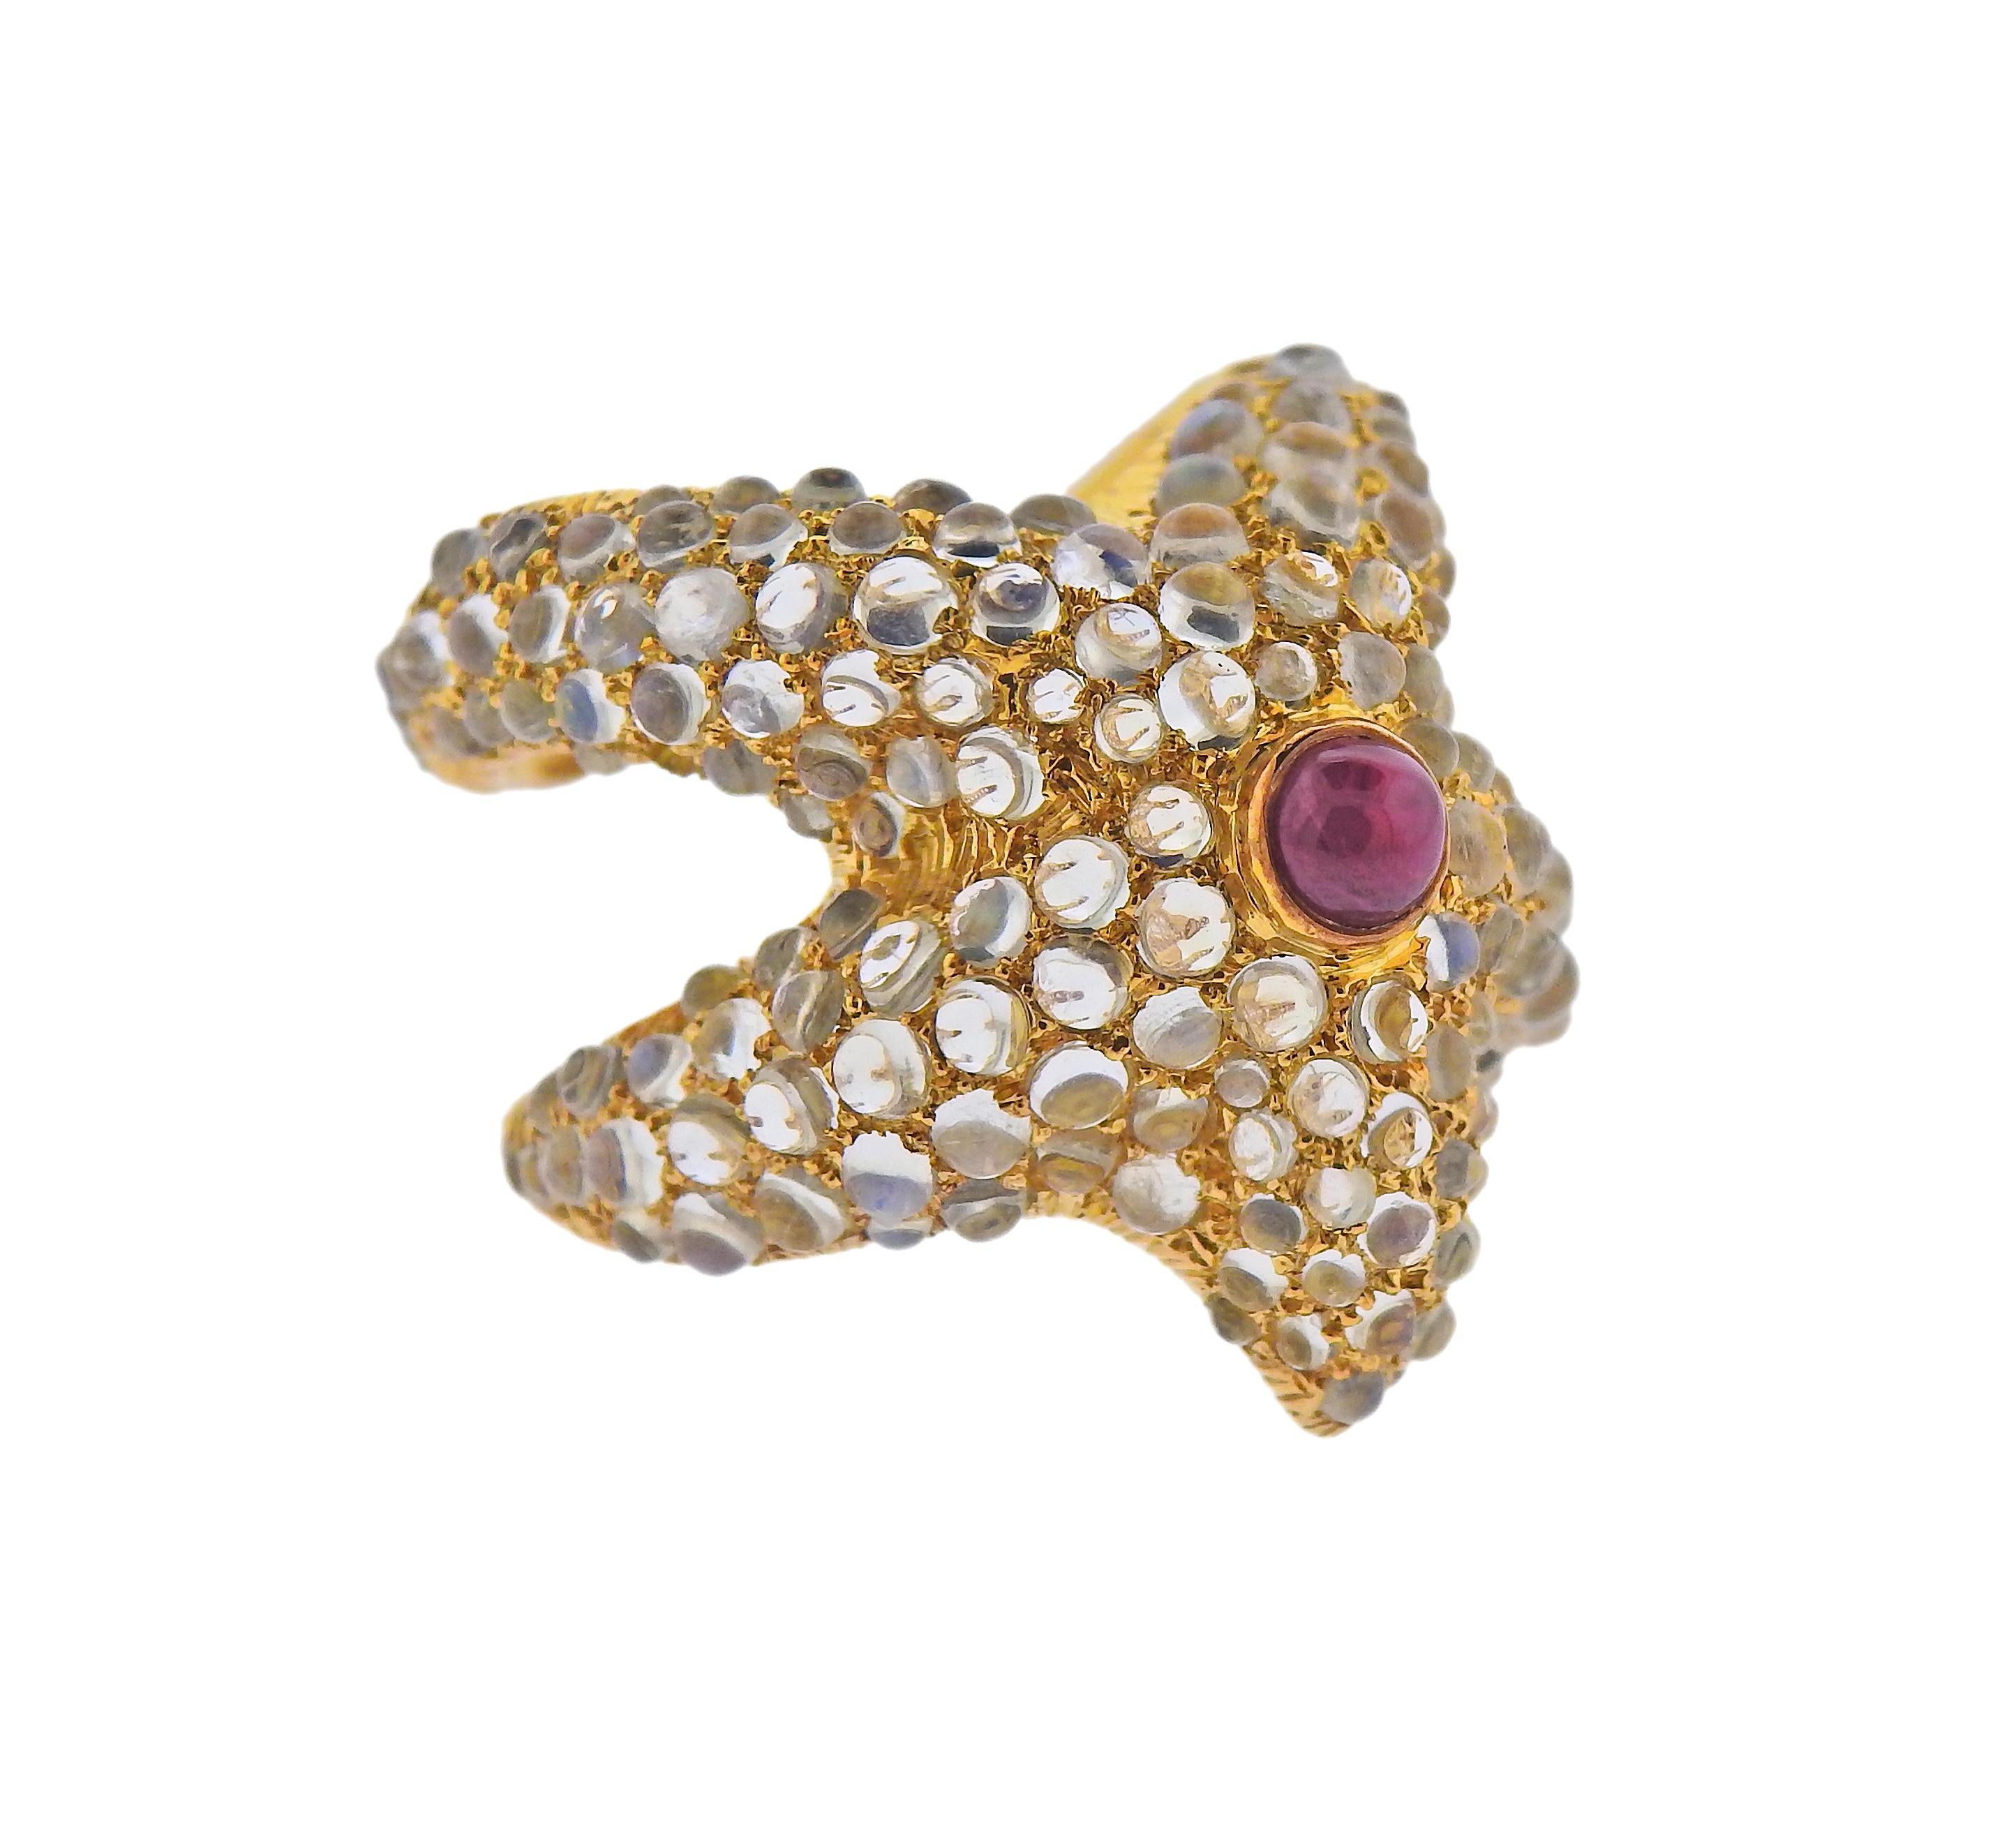 18k gold starfish cuff ring with ruby and moonstone cabochons. Ring size - 6.25, ring top is 24mm wide. Weight - 6.7 grams. 